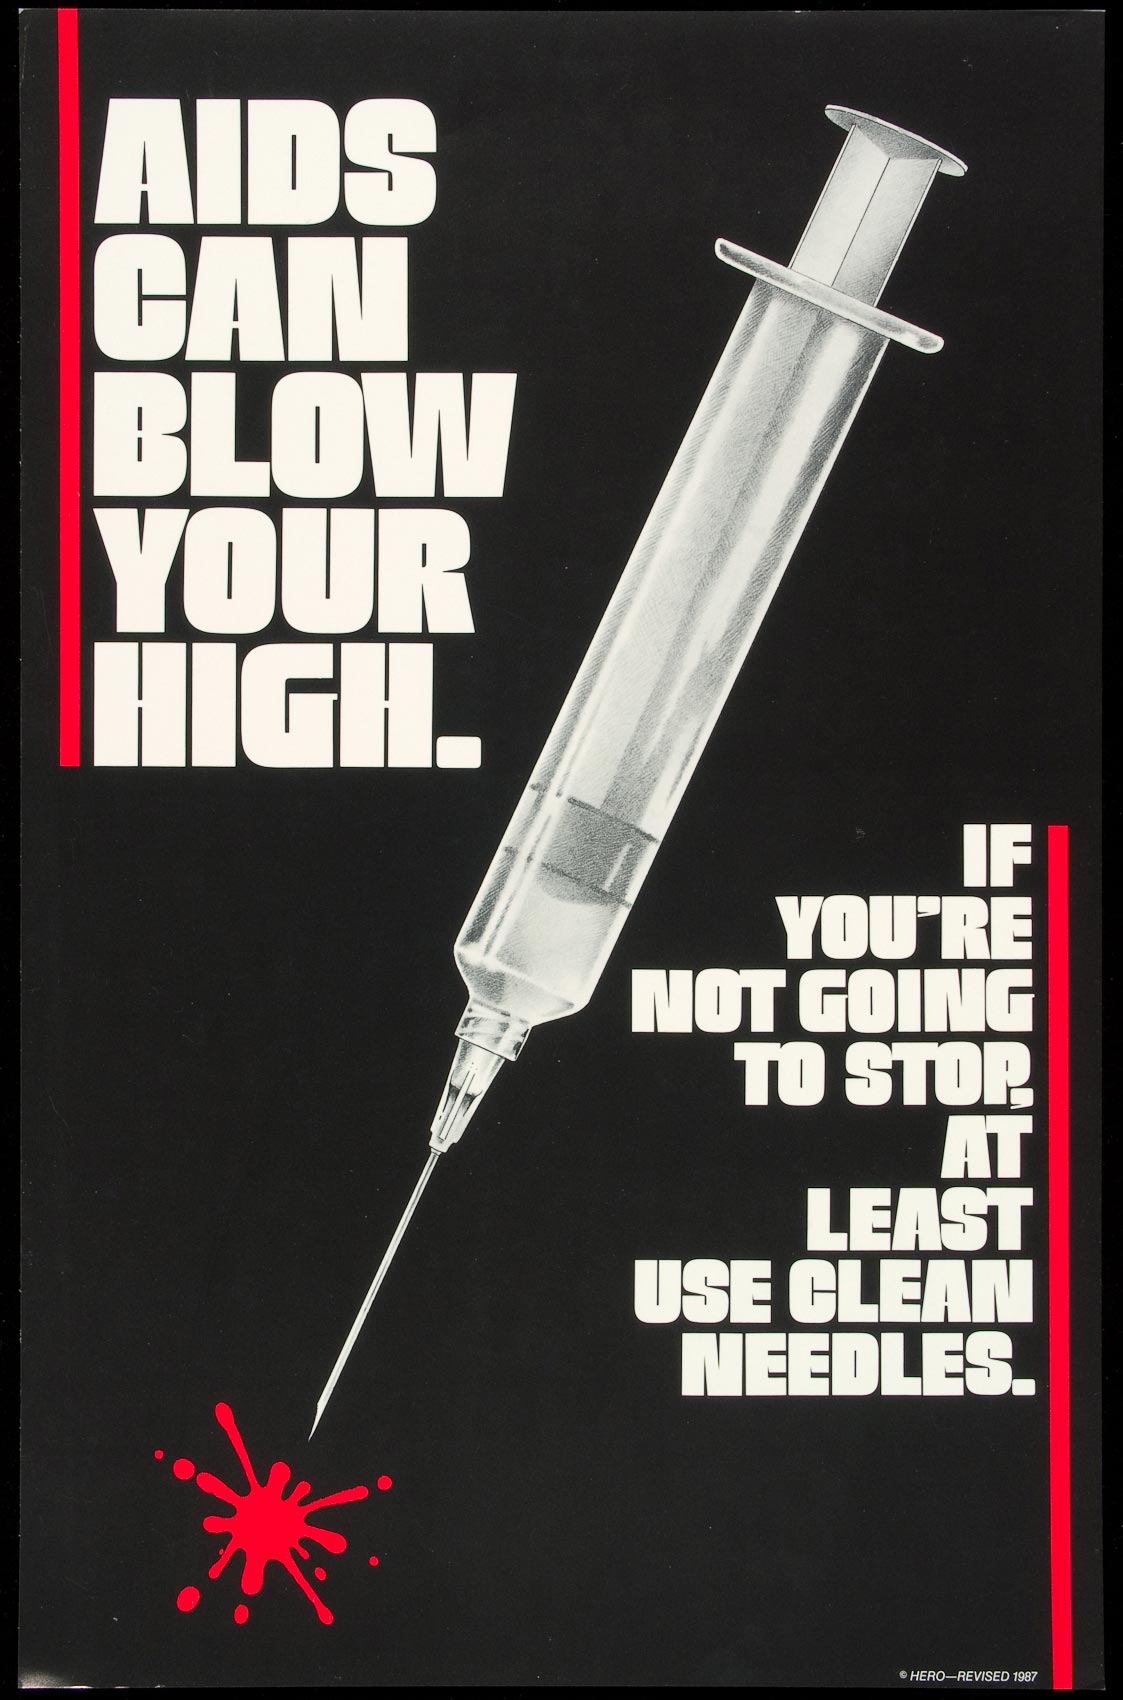 AIDS poster show needle with text AIDS CAN BLOW YOUR HIGH